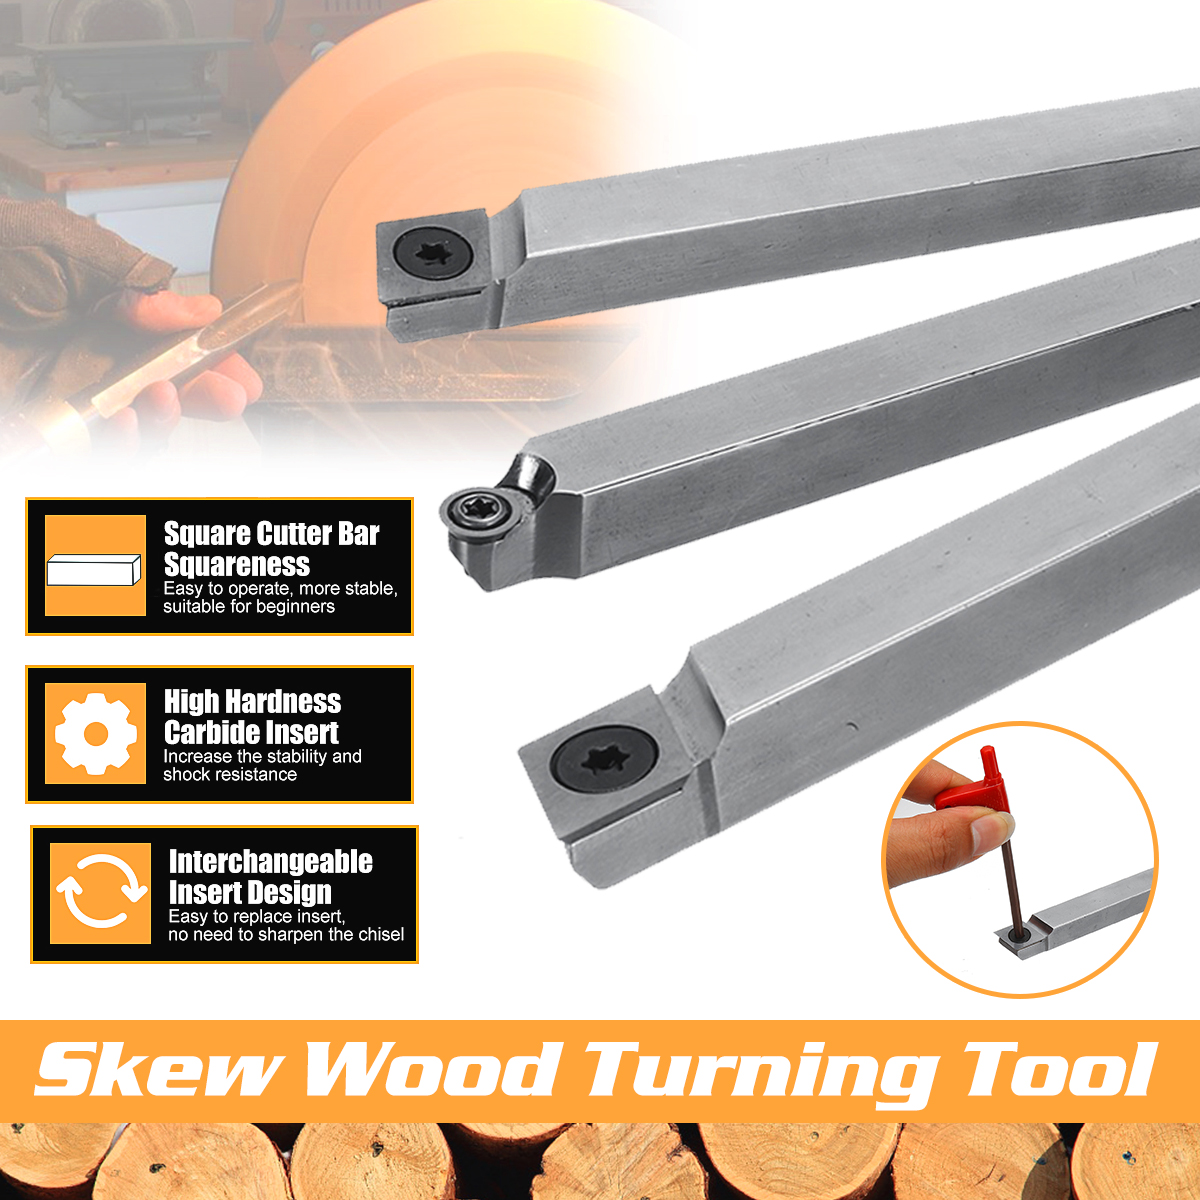 Skew-Wood-Turning-Tool-With-Wood-Carbide-Insert-Cutter-Square-Shank-Woodworking-Tool-1460977-1